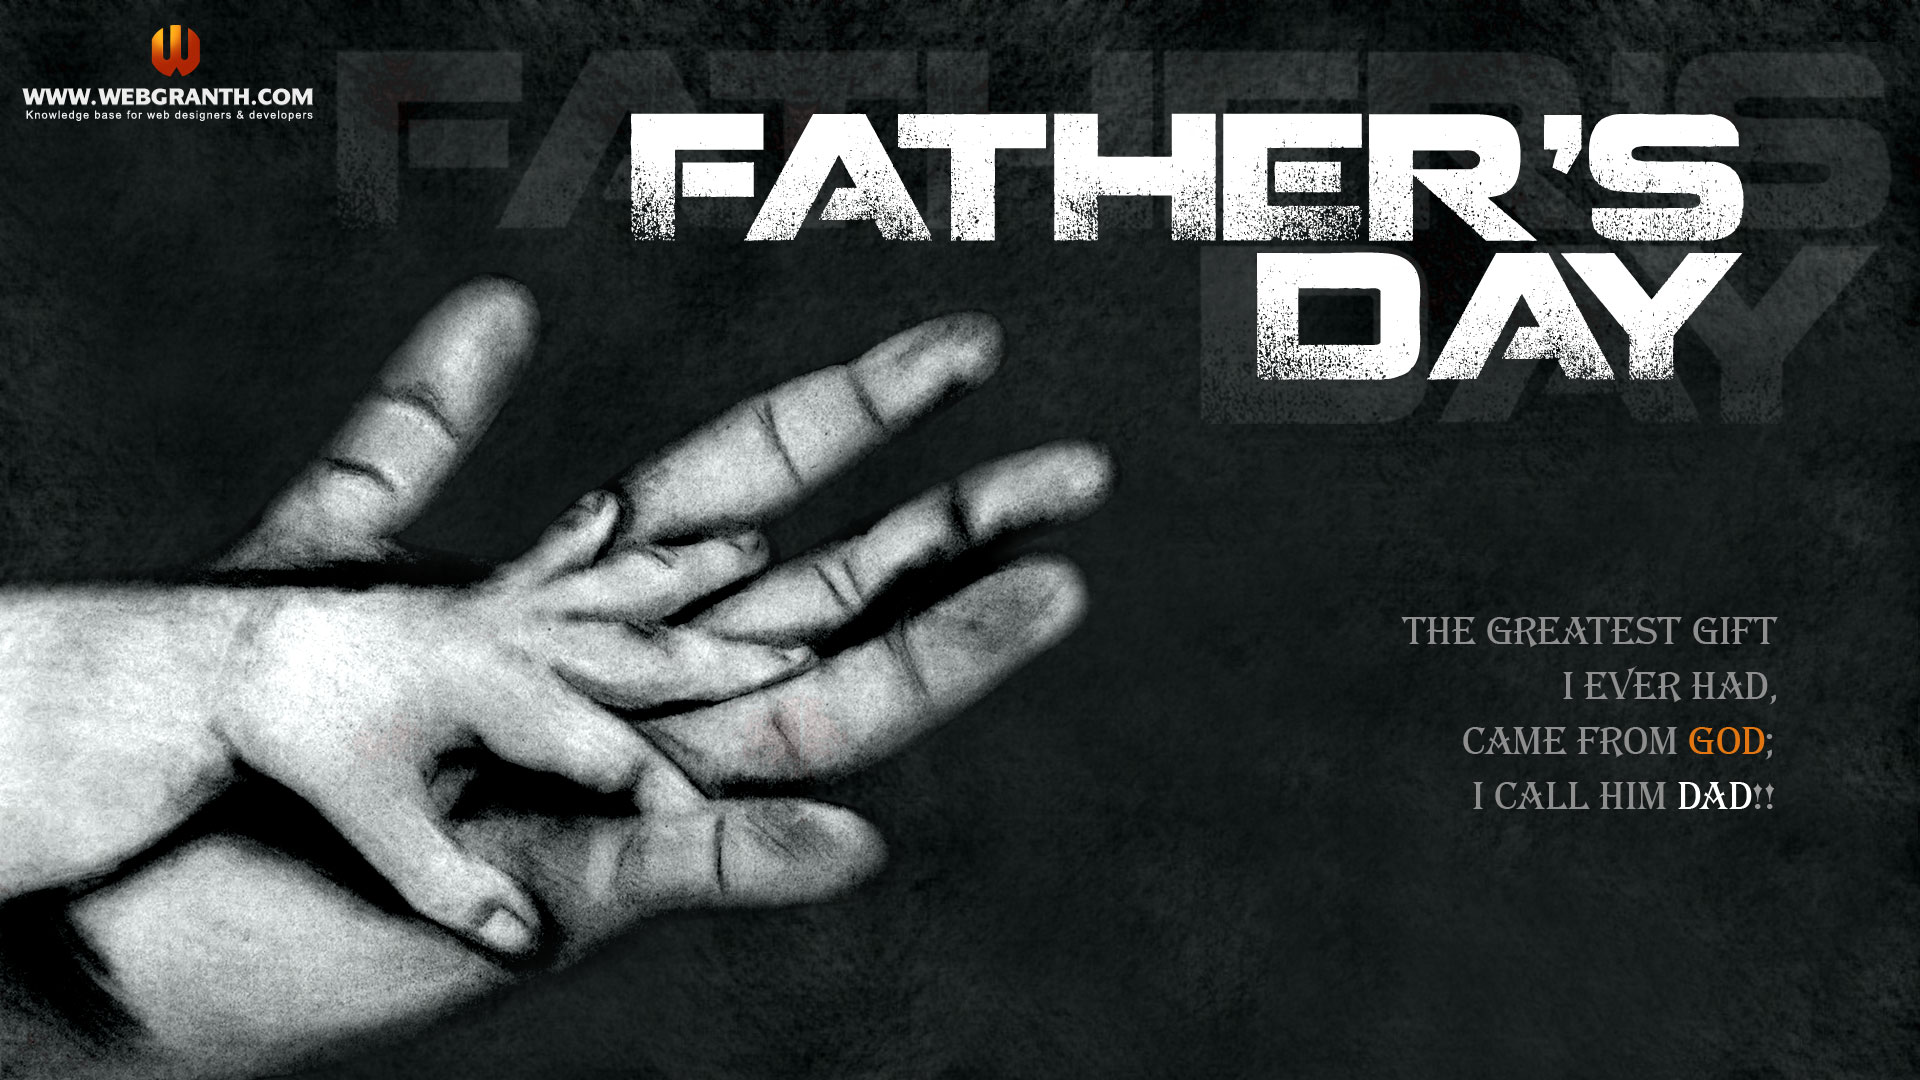 HD desktop wallpaper for Father's Day featuring an adult's hand with a child's hand and a heartwarming message about dad.